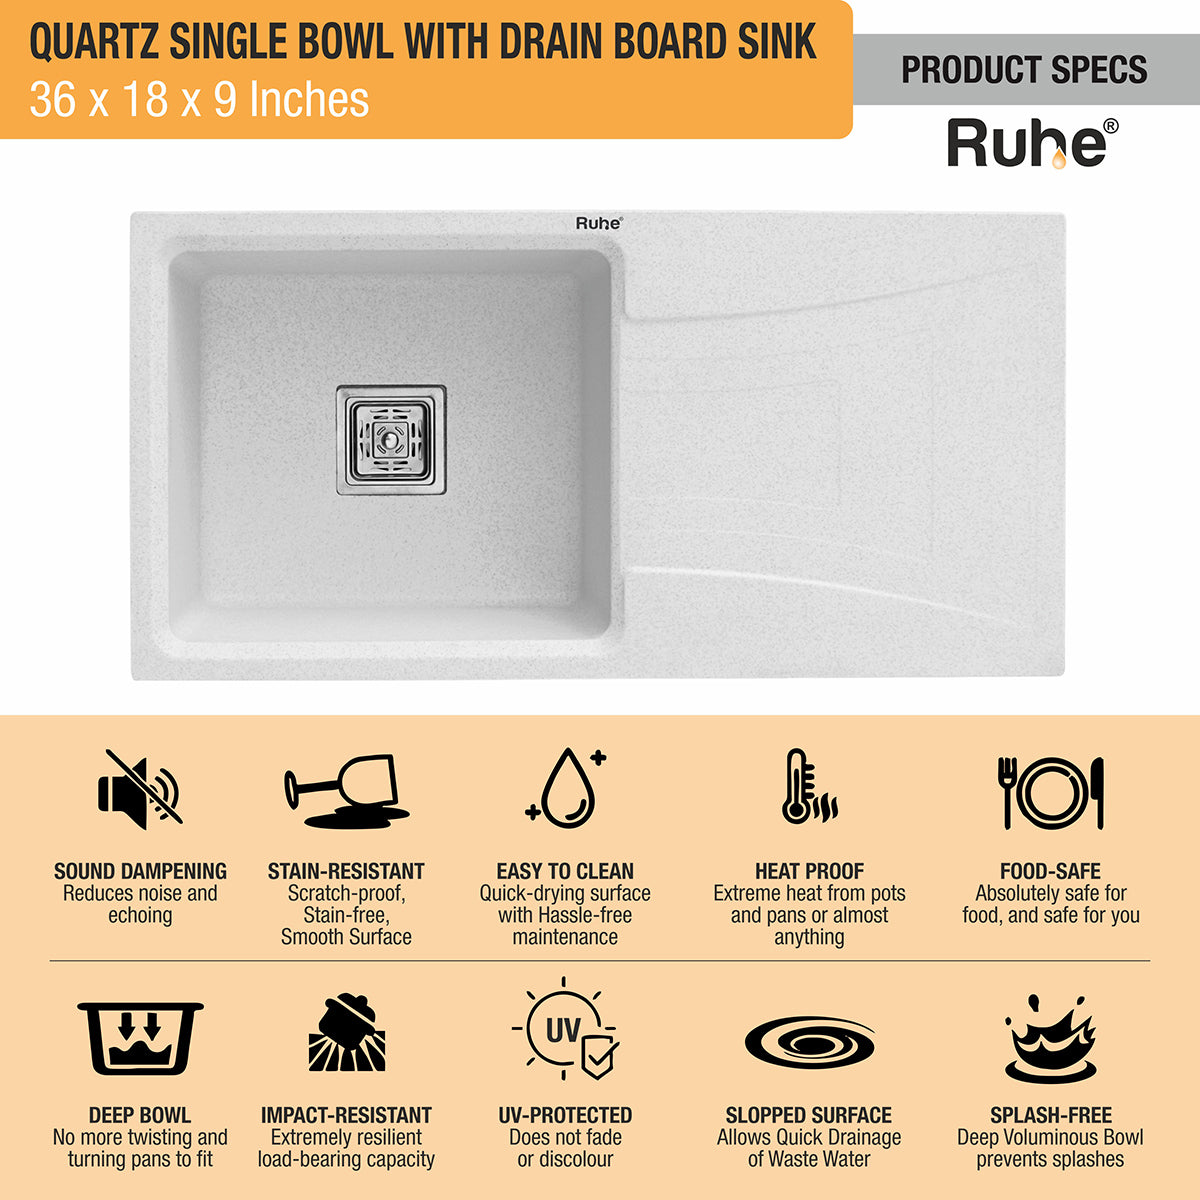 Quartz Single Bowl Crystal White Kitchen Sink with Drainboard (36 x 18 x 9 inches) features and benefits